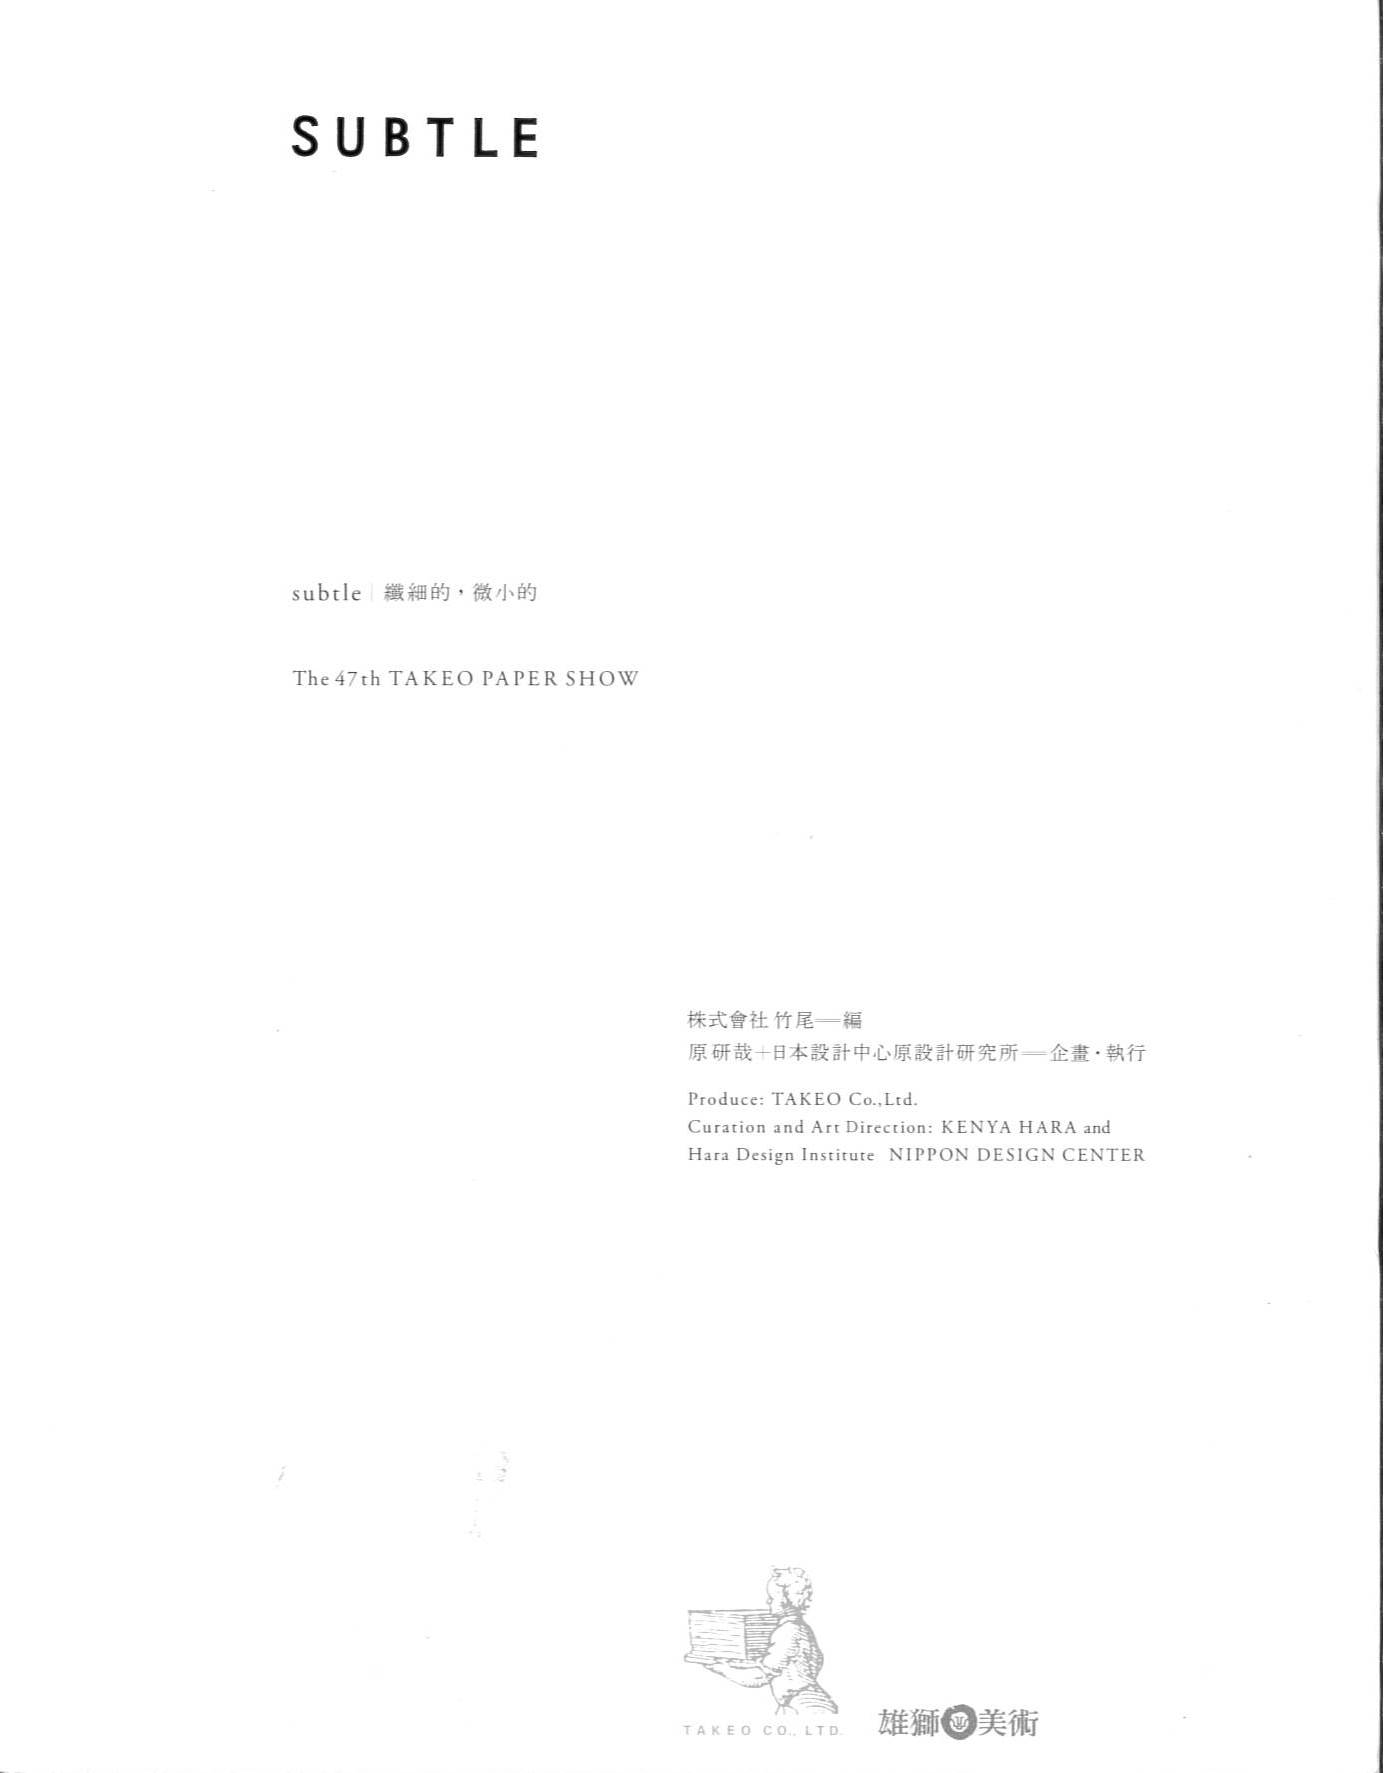 SUBTLE 纖細的, 微小的 : the 47th Takeo paper show